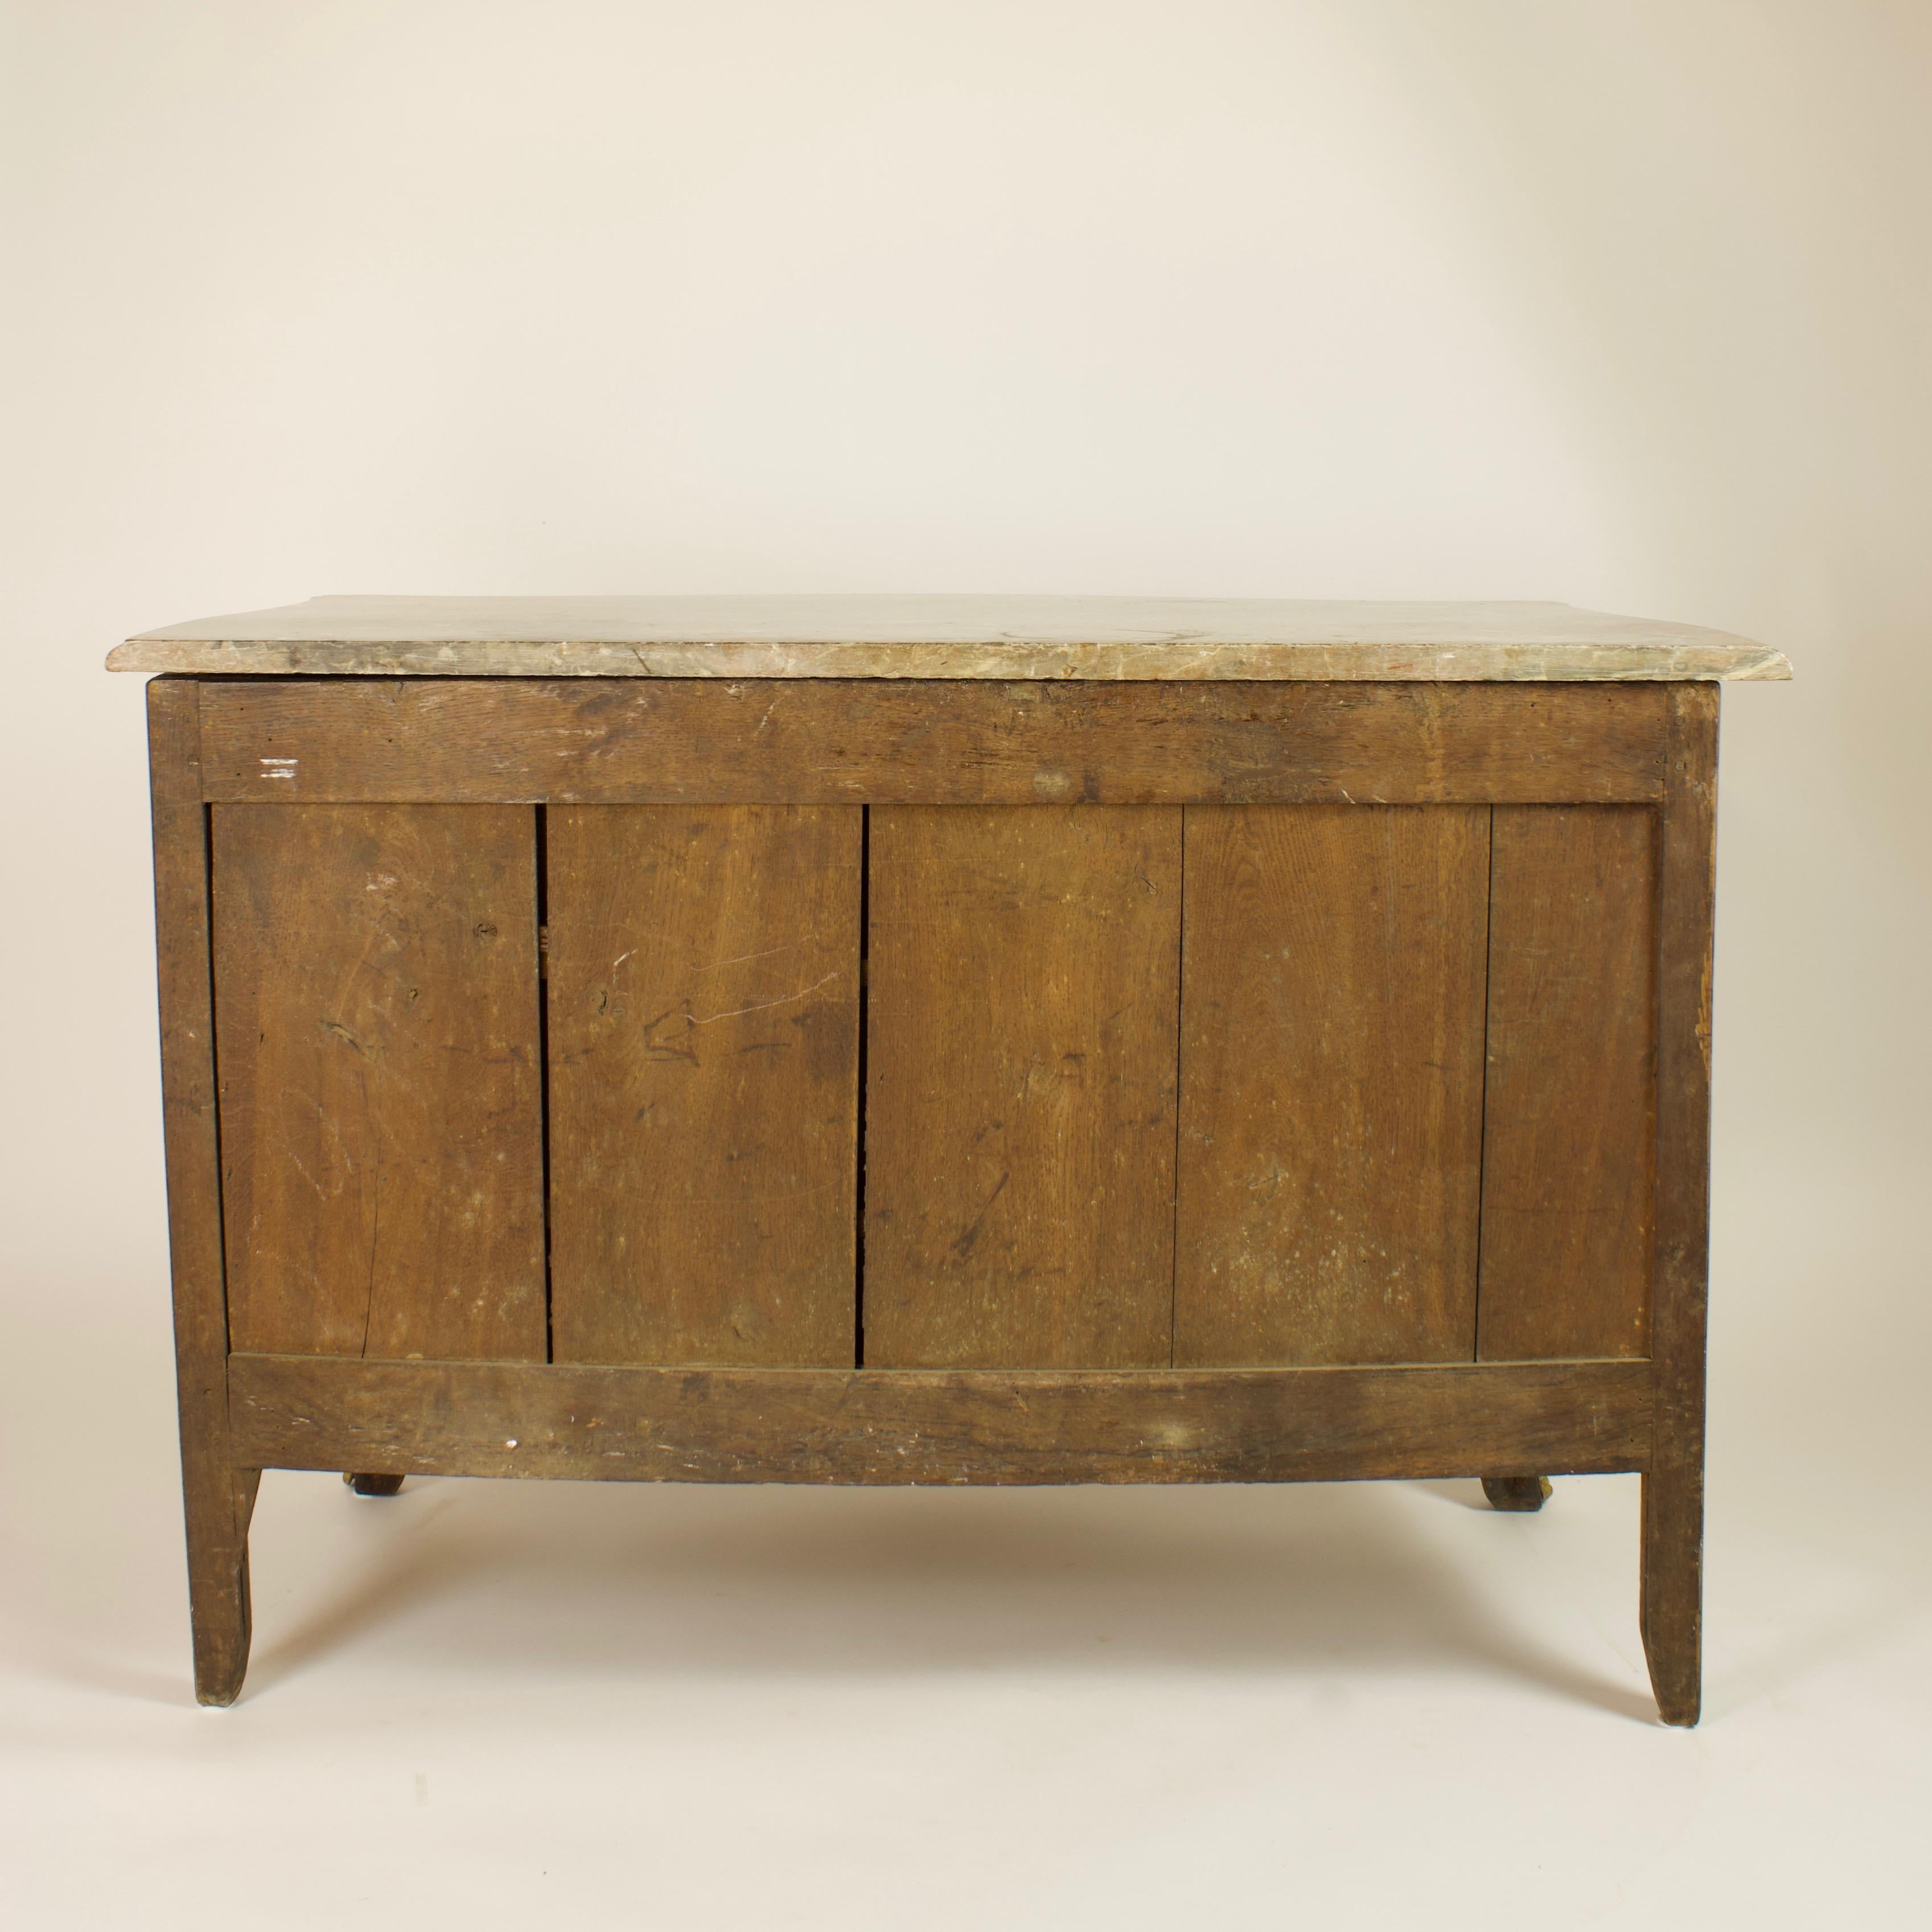 18th Century French Louis XV Marquetry Gilt-Bronze Commode 'En Tombeau', Stamped 